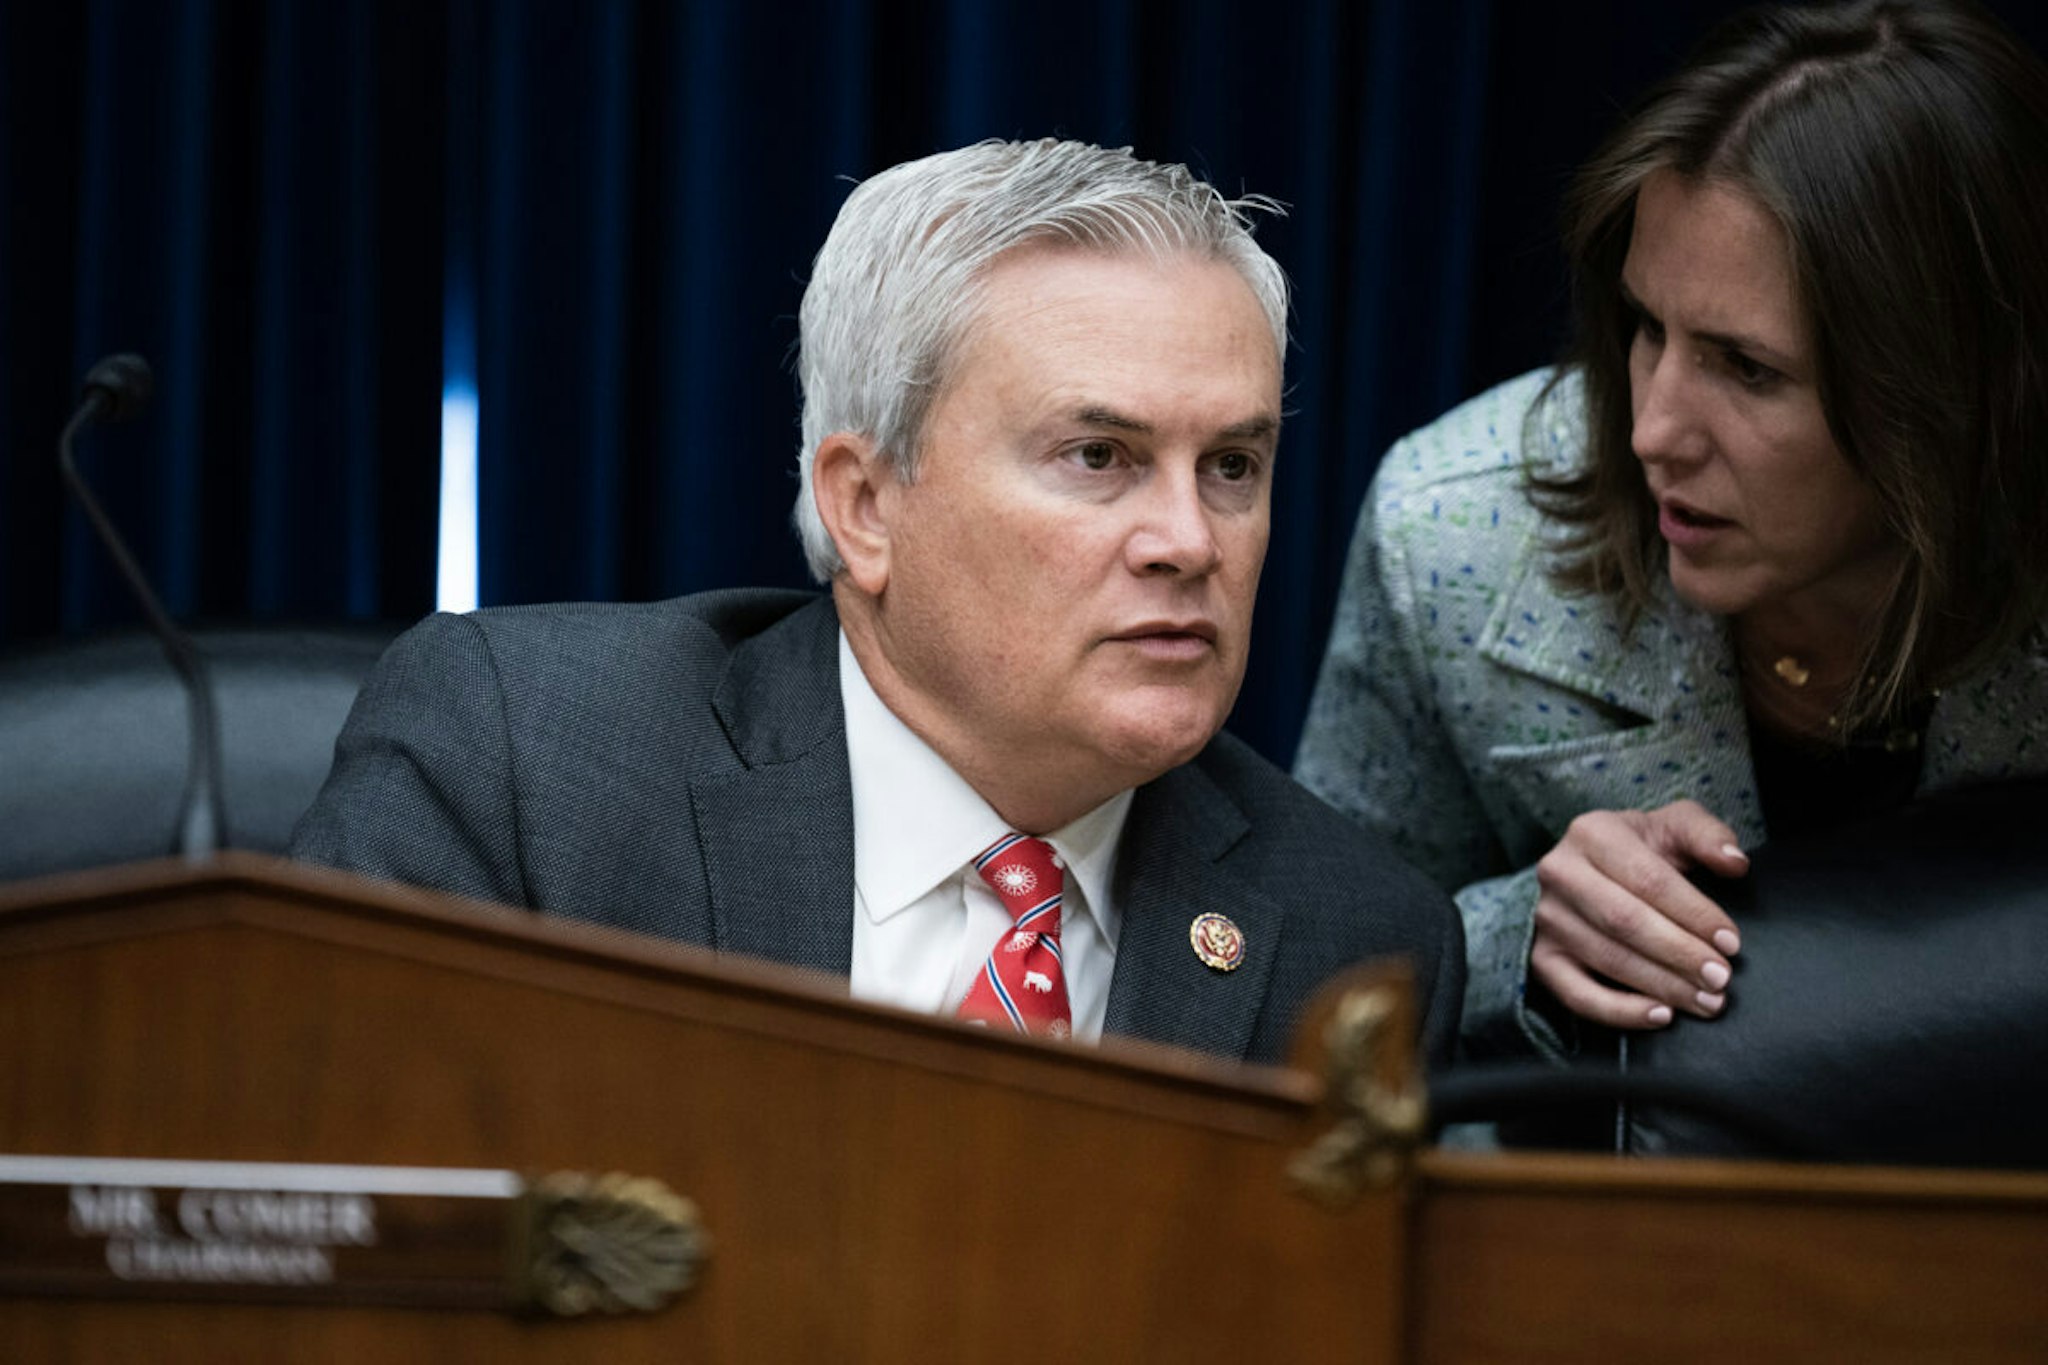 Chairman James Comer, R-Ky., talks with an aide during the House Oversight and Accountability Committee hearing titled "Overdue Oversight of the Capital City: Part II," in Rayburn Building on Tuesday, May 16, 2023.